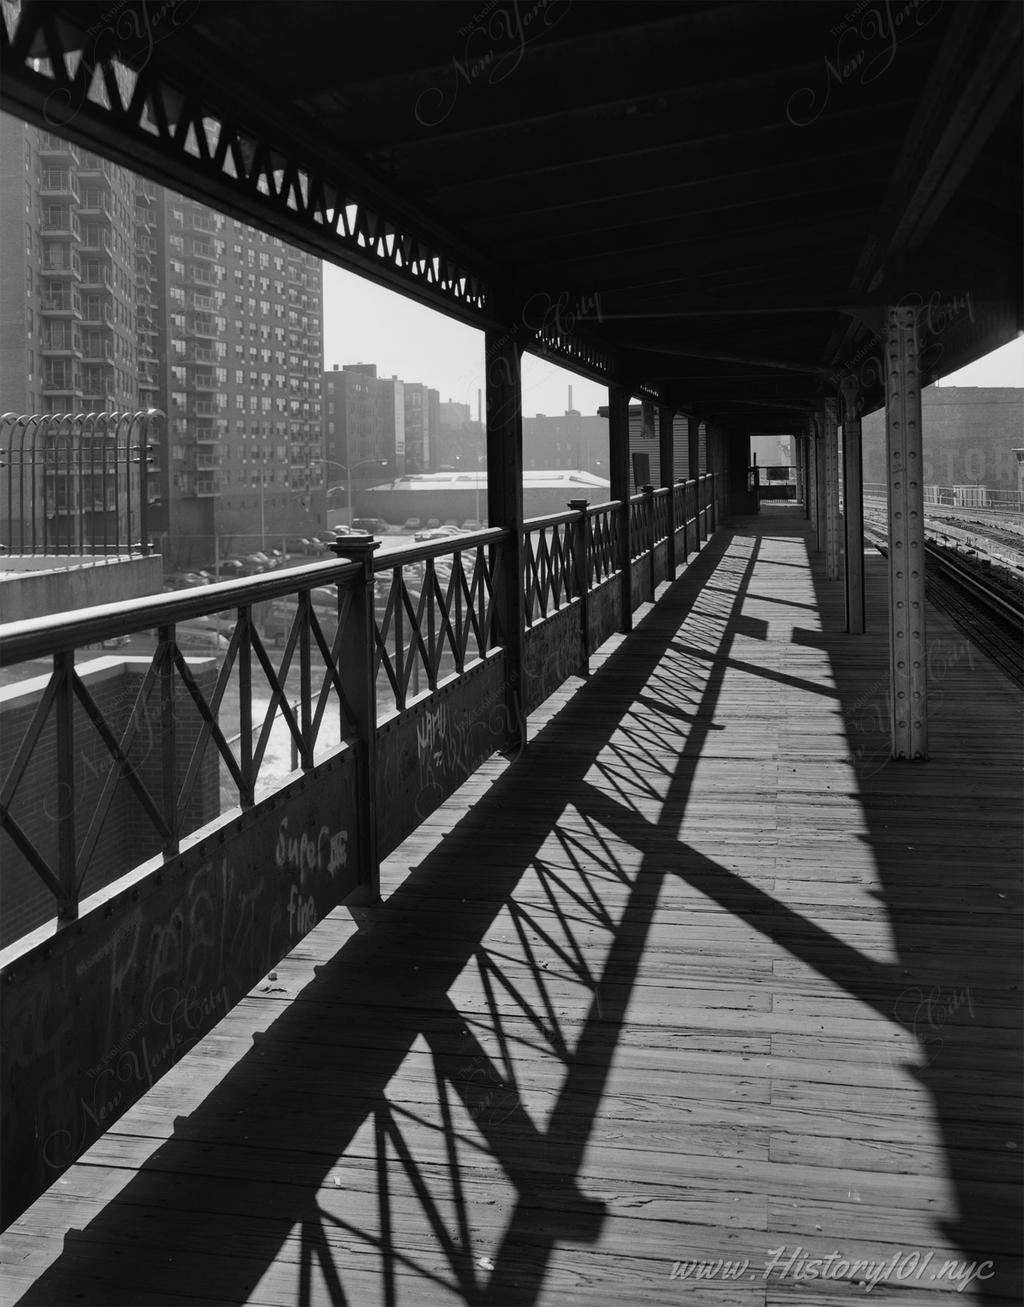 Photograph looking south on the northbound platform of the Third Avenue Elevated Line at 169th Street in the Bronx.